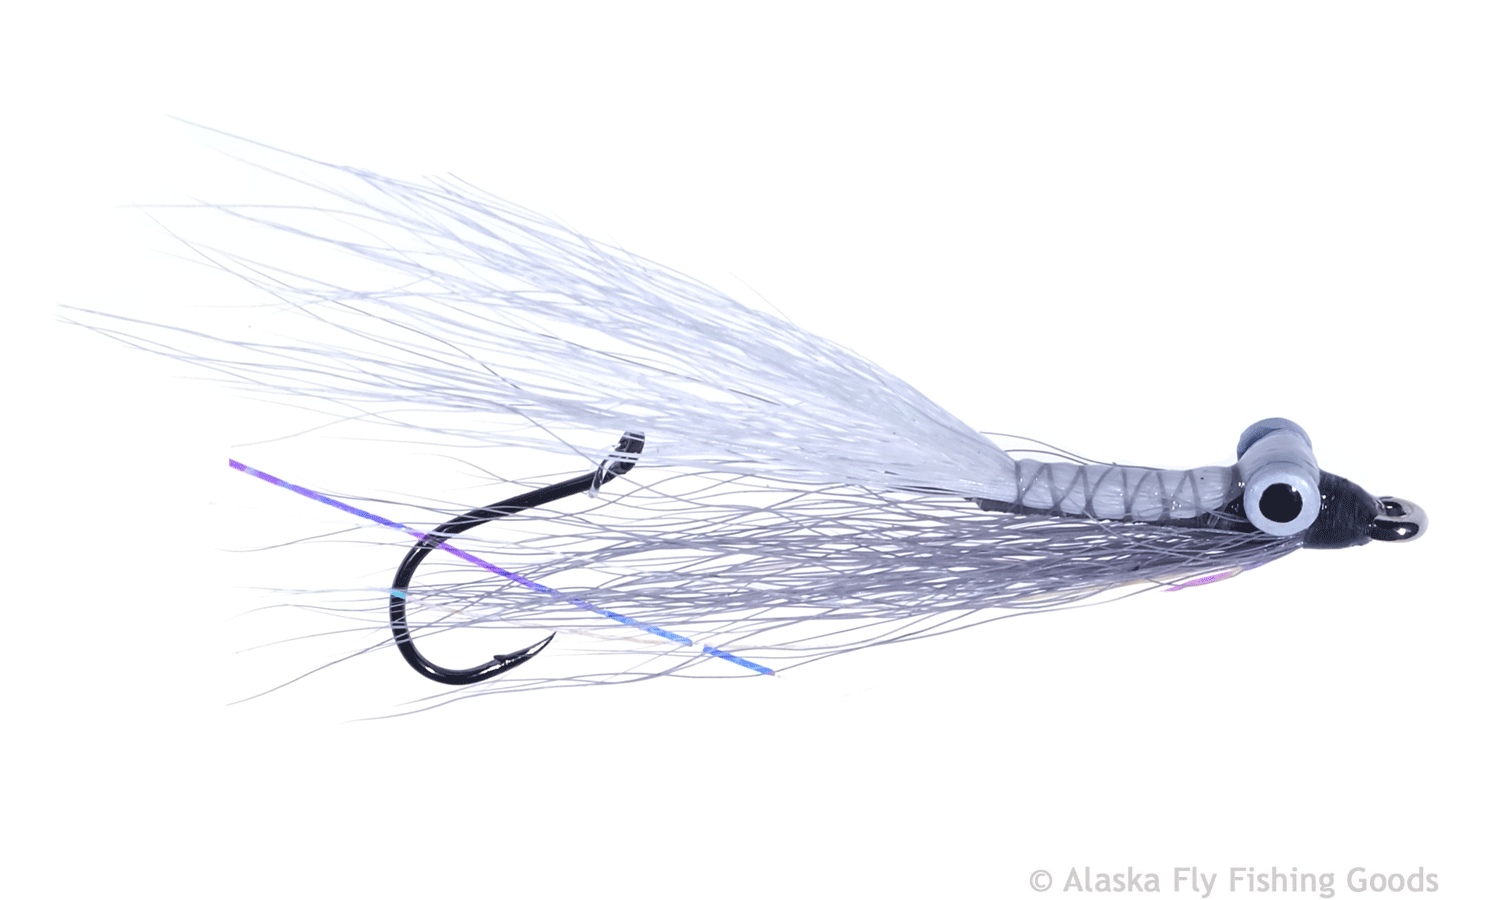 https://www.alaskaflyfishinggoods.com/wp-content/uploads/product_images/sting-clouser-gray-white.gif